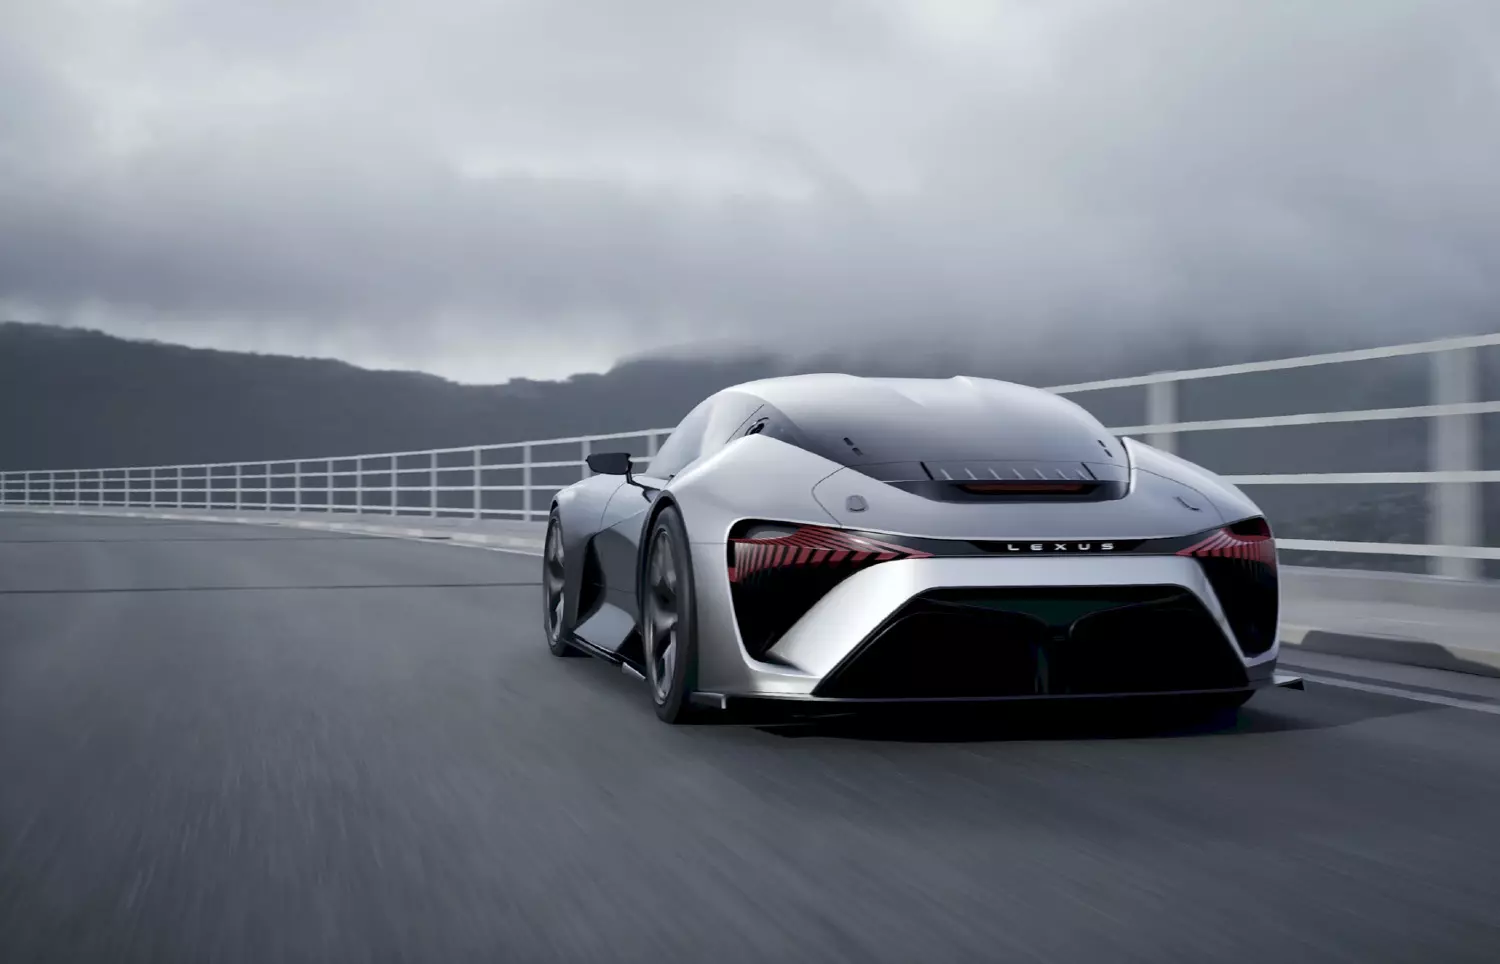 Lexus Reveals More Images of the Electric LFA